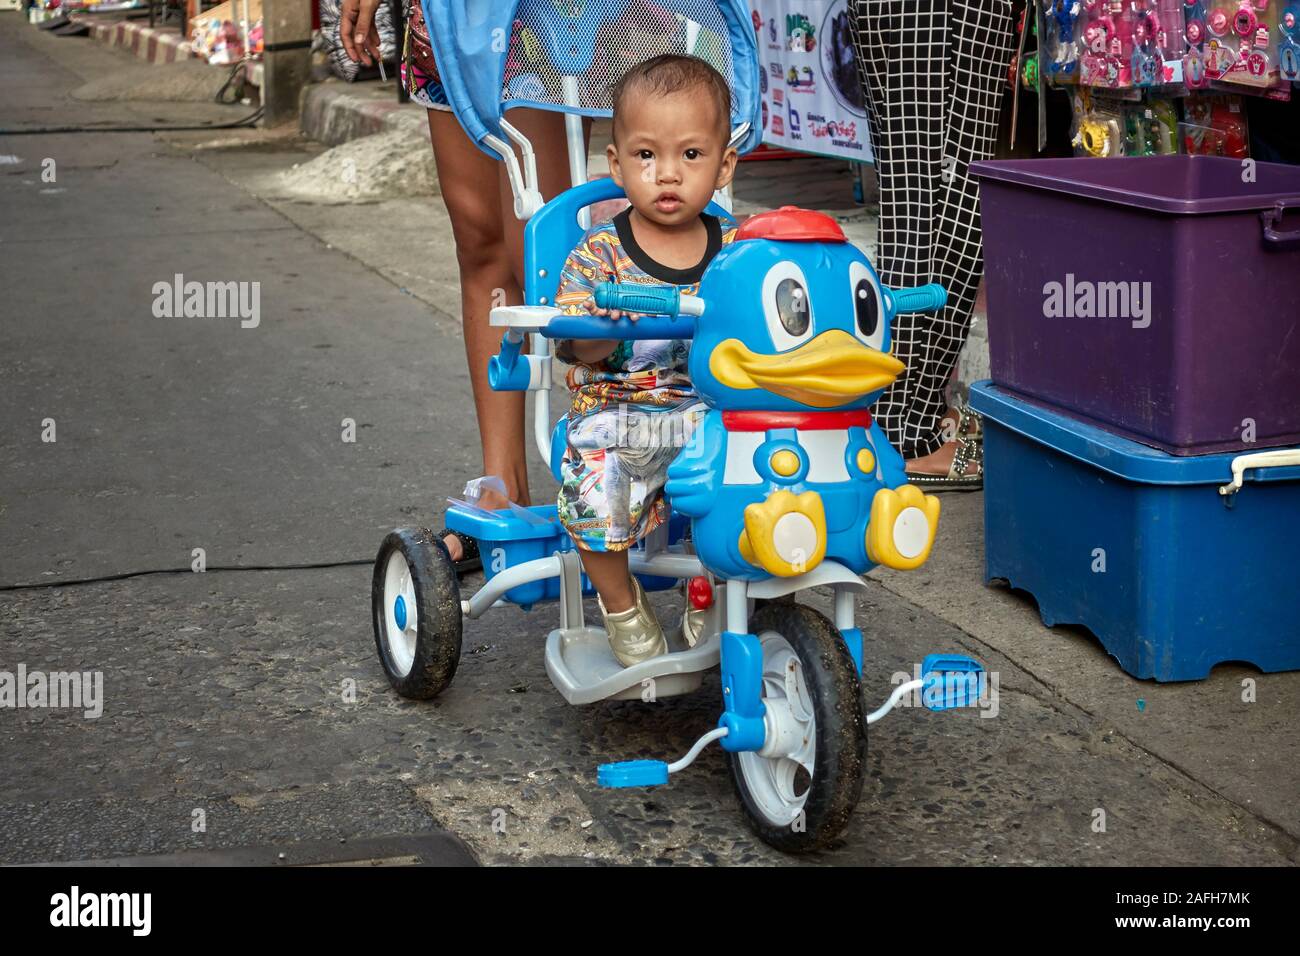 Child riding a cartoon pedal  bike with stabilizers attached. Stock Photo